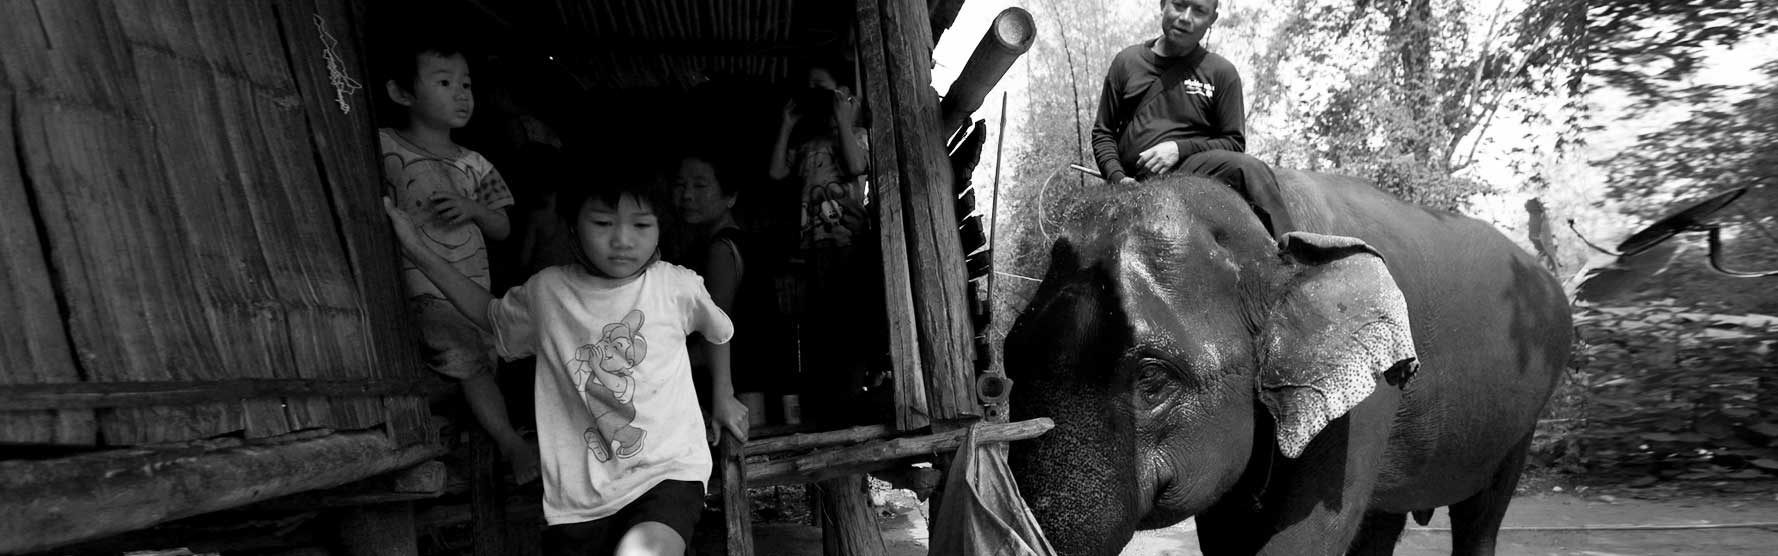 Reuter's Report: Hungry times at Thailand's elephant sanctuaries